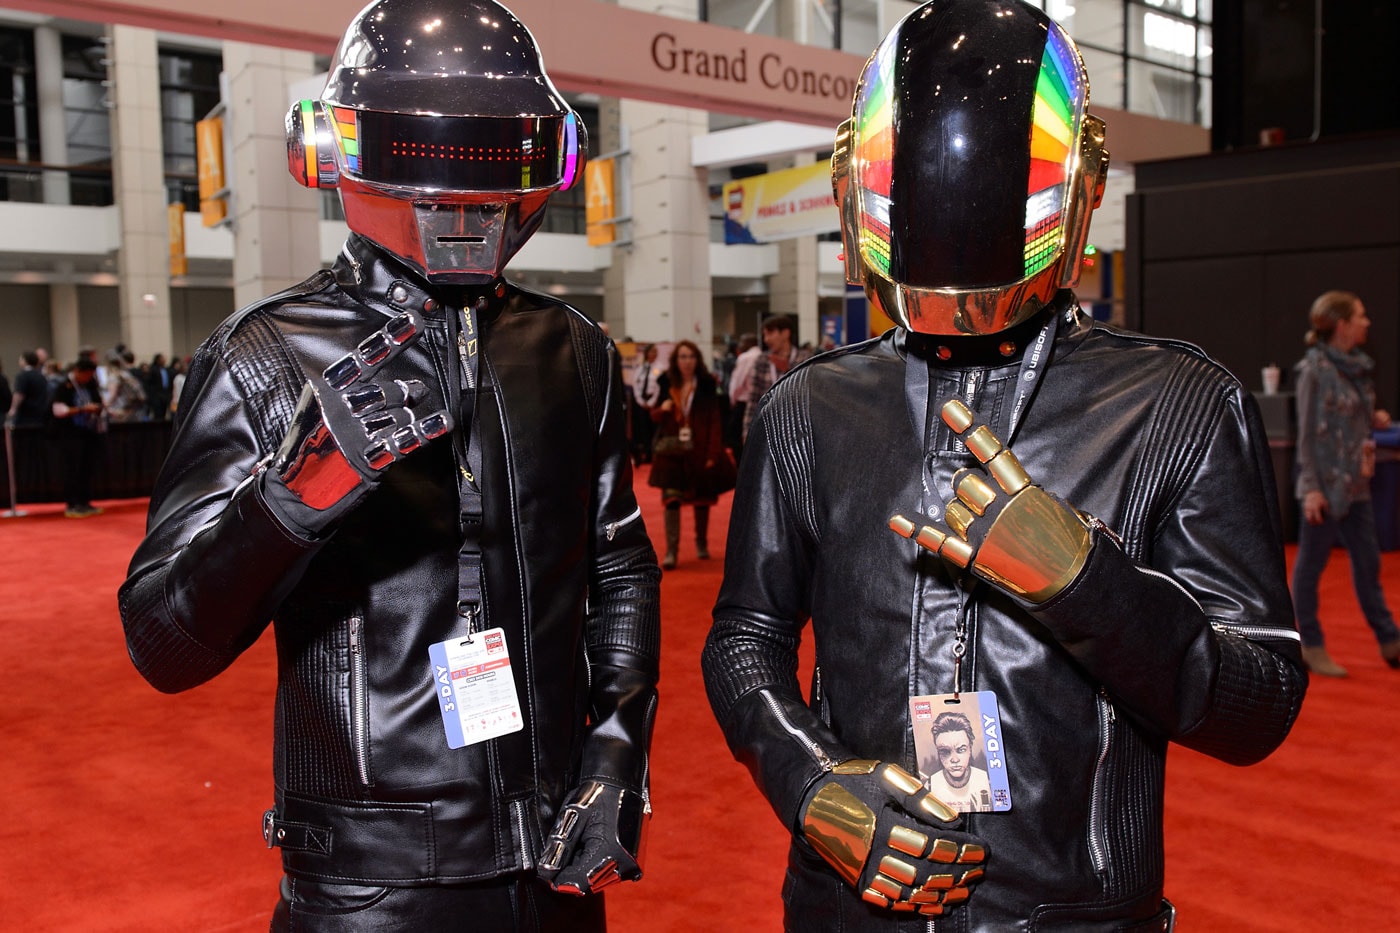 The Weeknd Recalls Working With Daft Punk